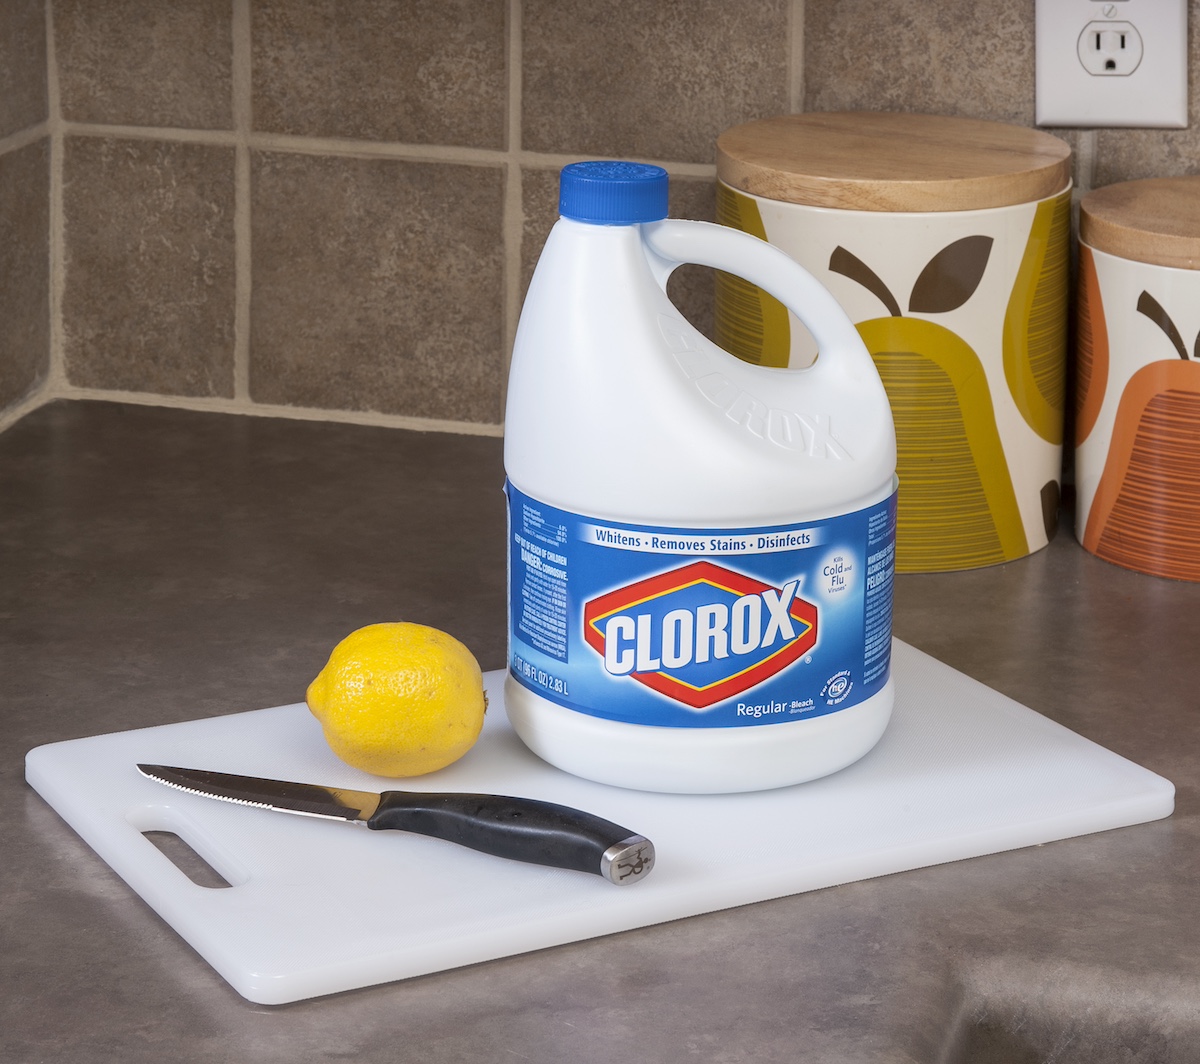 Cleaning cutting board with lemon and bleach